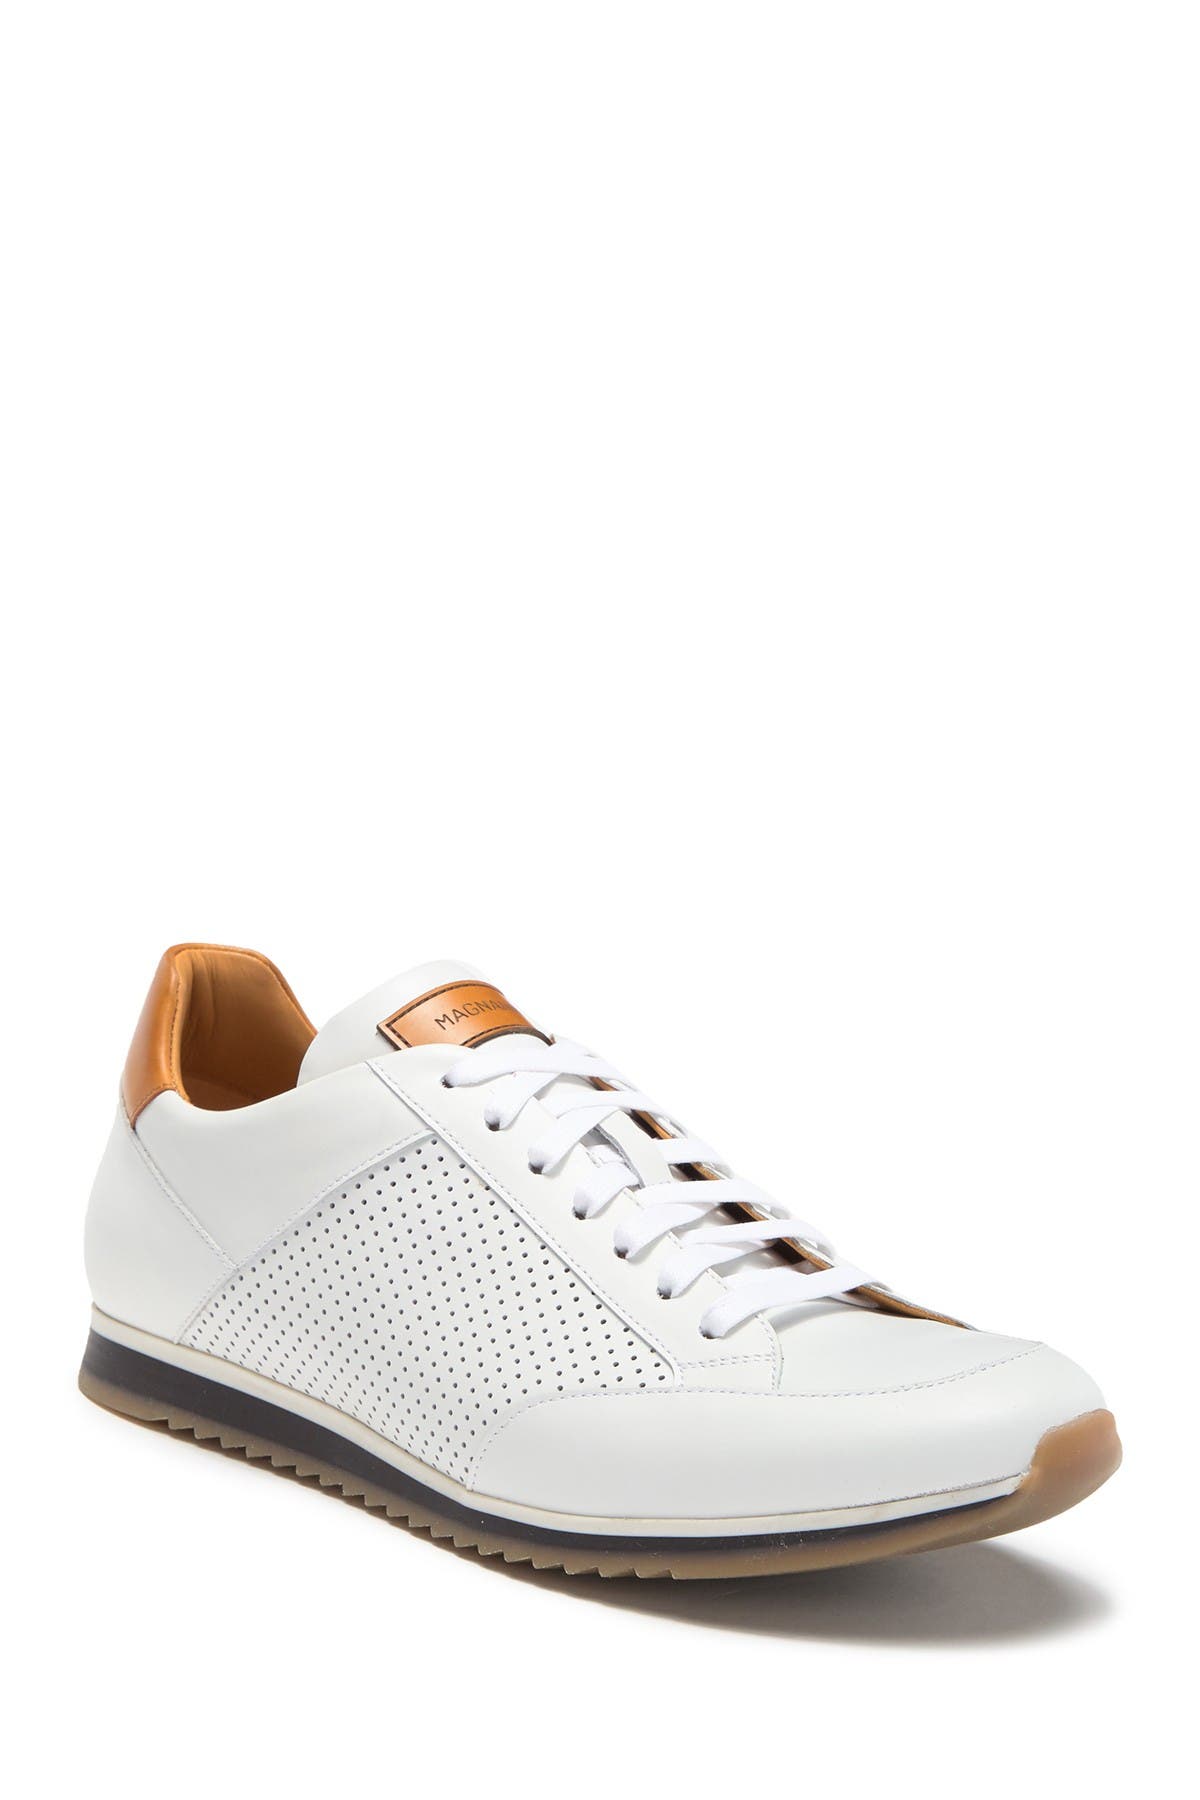 Magnanni | Chaz Perforated Sneaker 